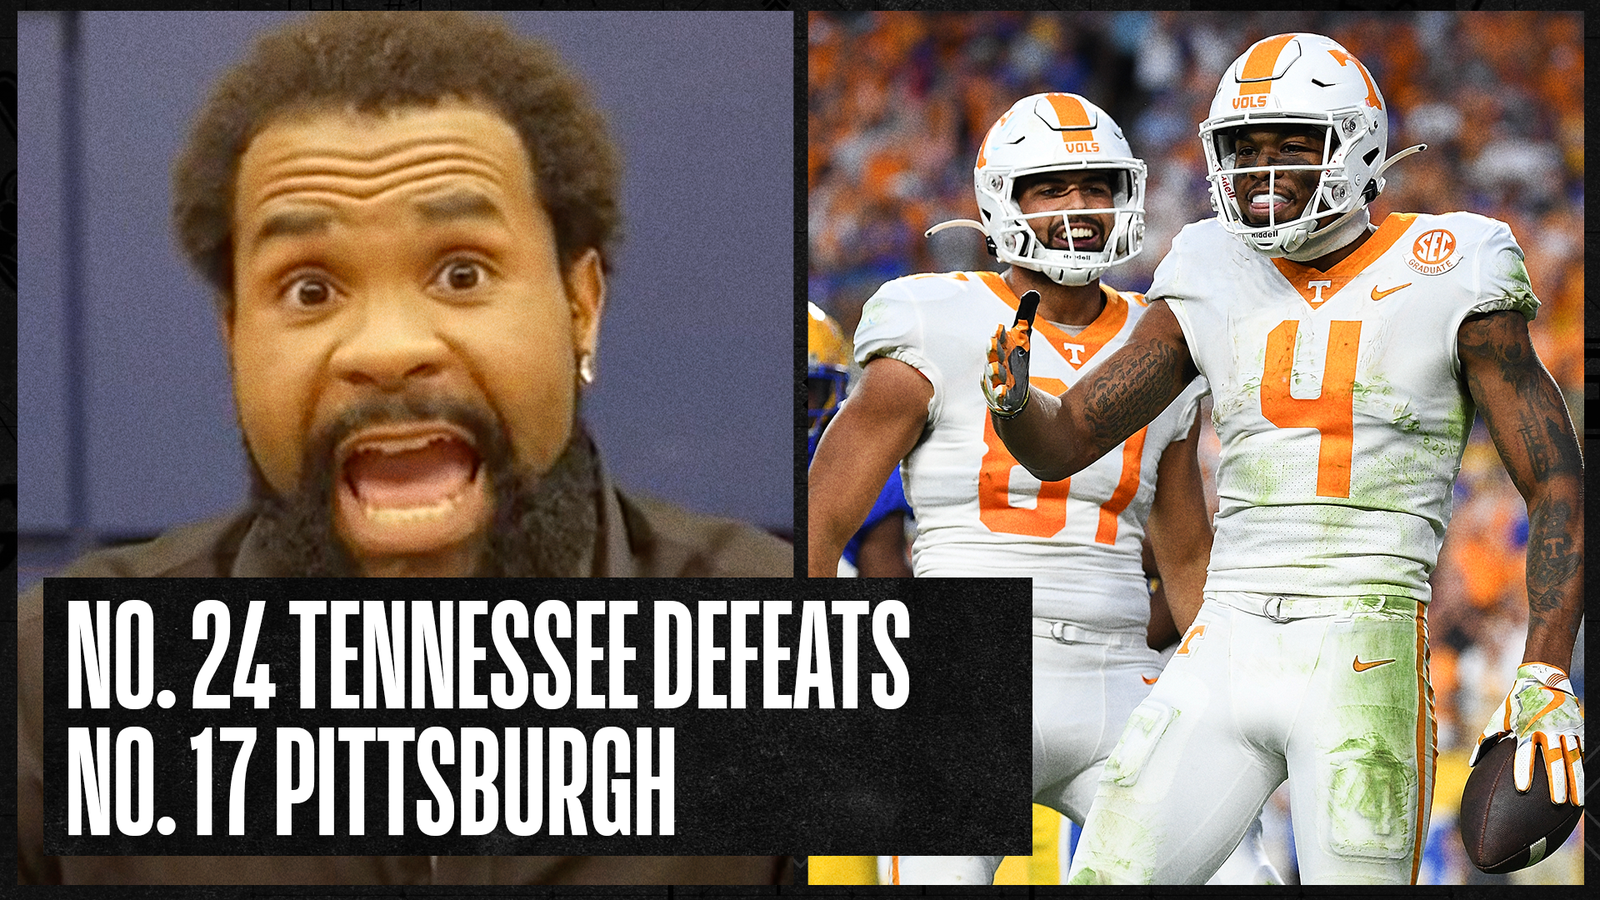 Big win for Tennessee